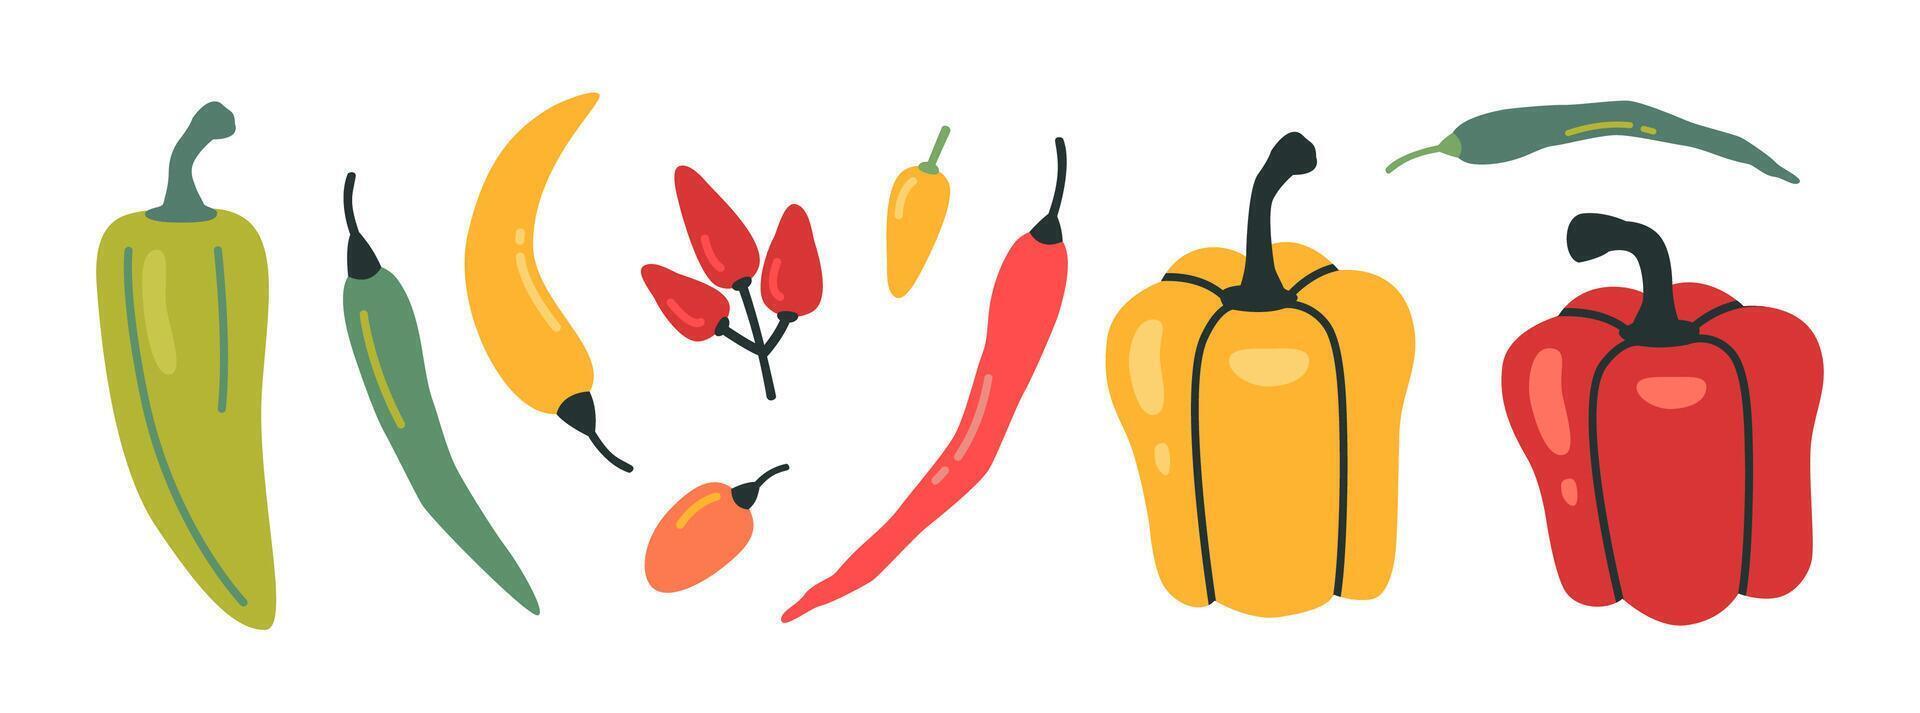 Set of peppers, various sorts, shapes and sizes. Chili, jalapeno, paprika, bell, hot and sweet peppers, cartoon style. Trendy modern illustration isolated on white, hand drawn, flat design vector